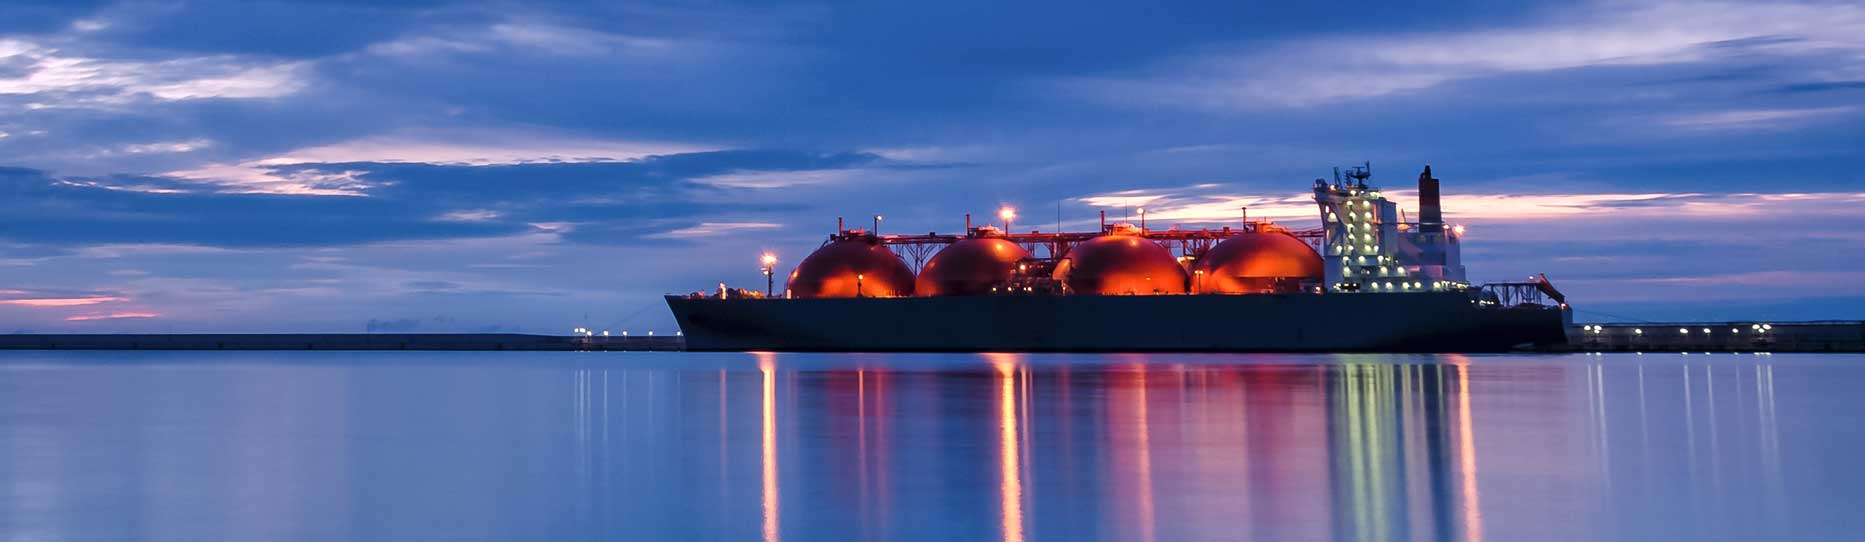 Liquefied natural gas (LNG) tanker